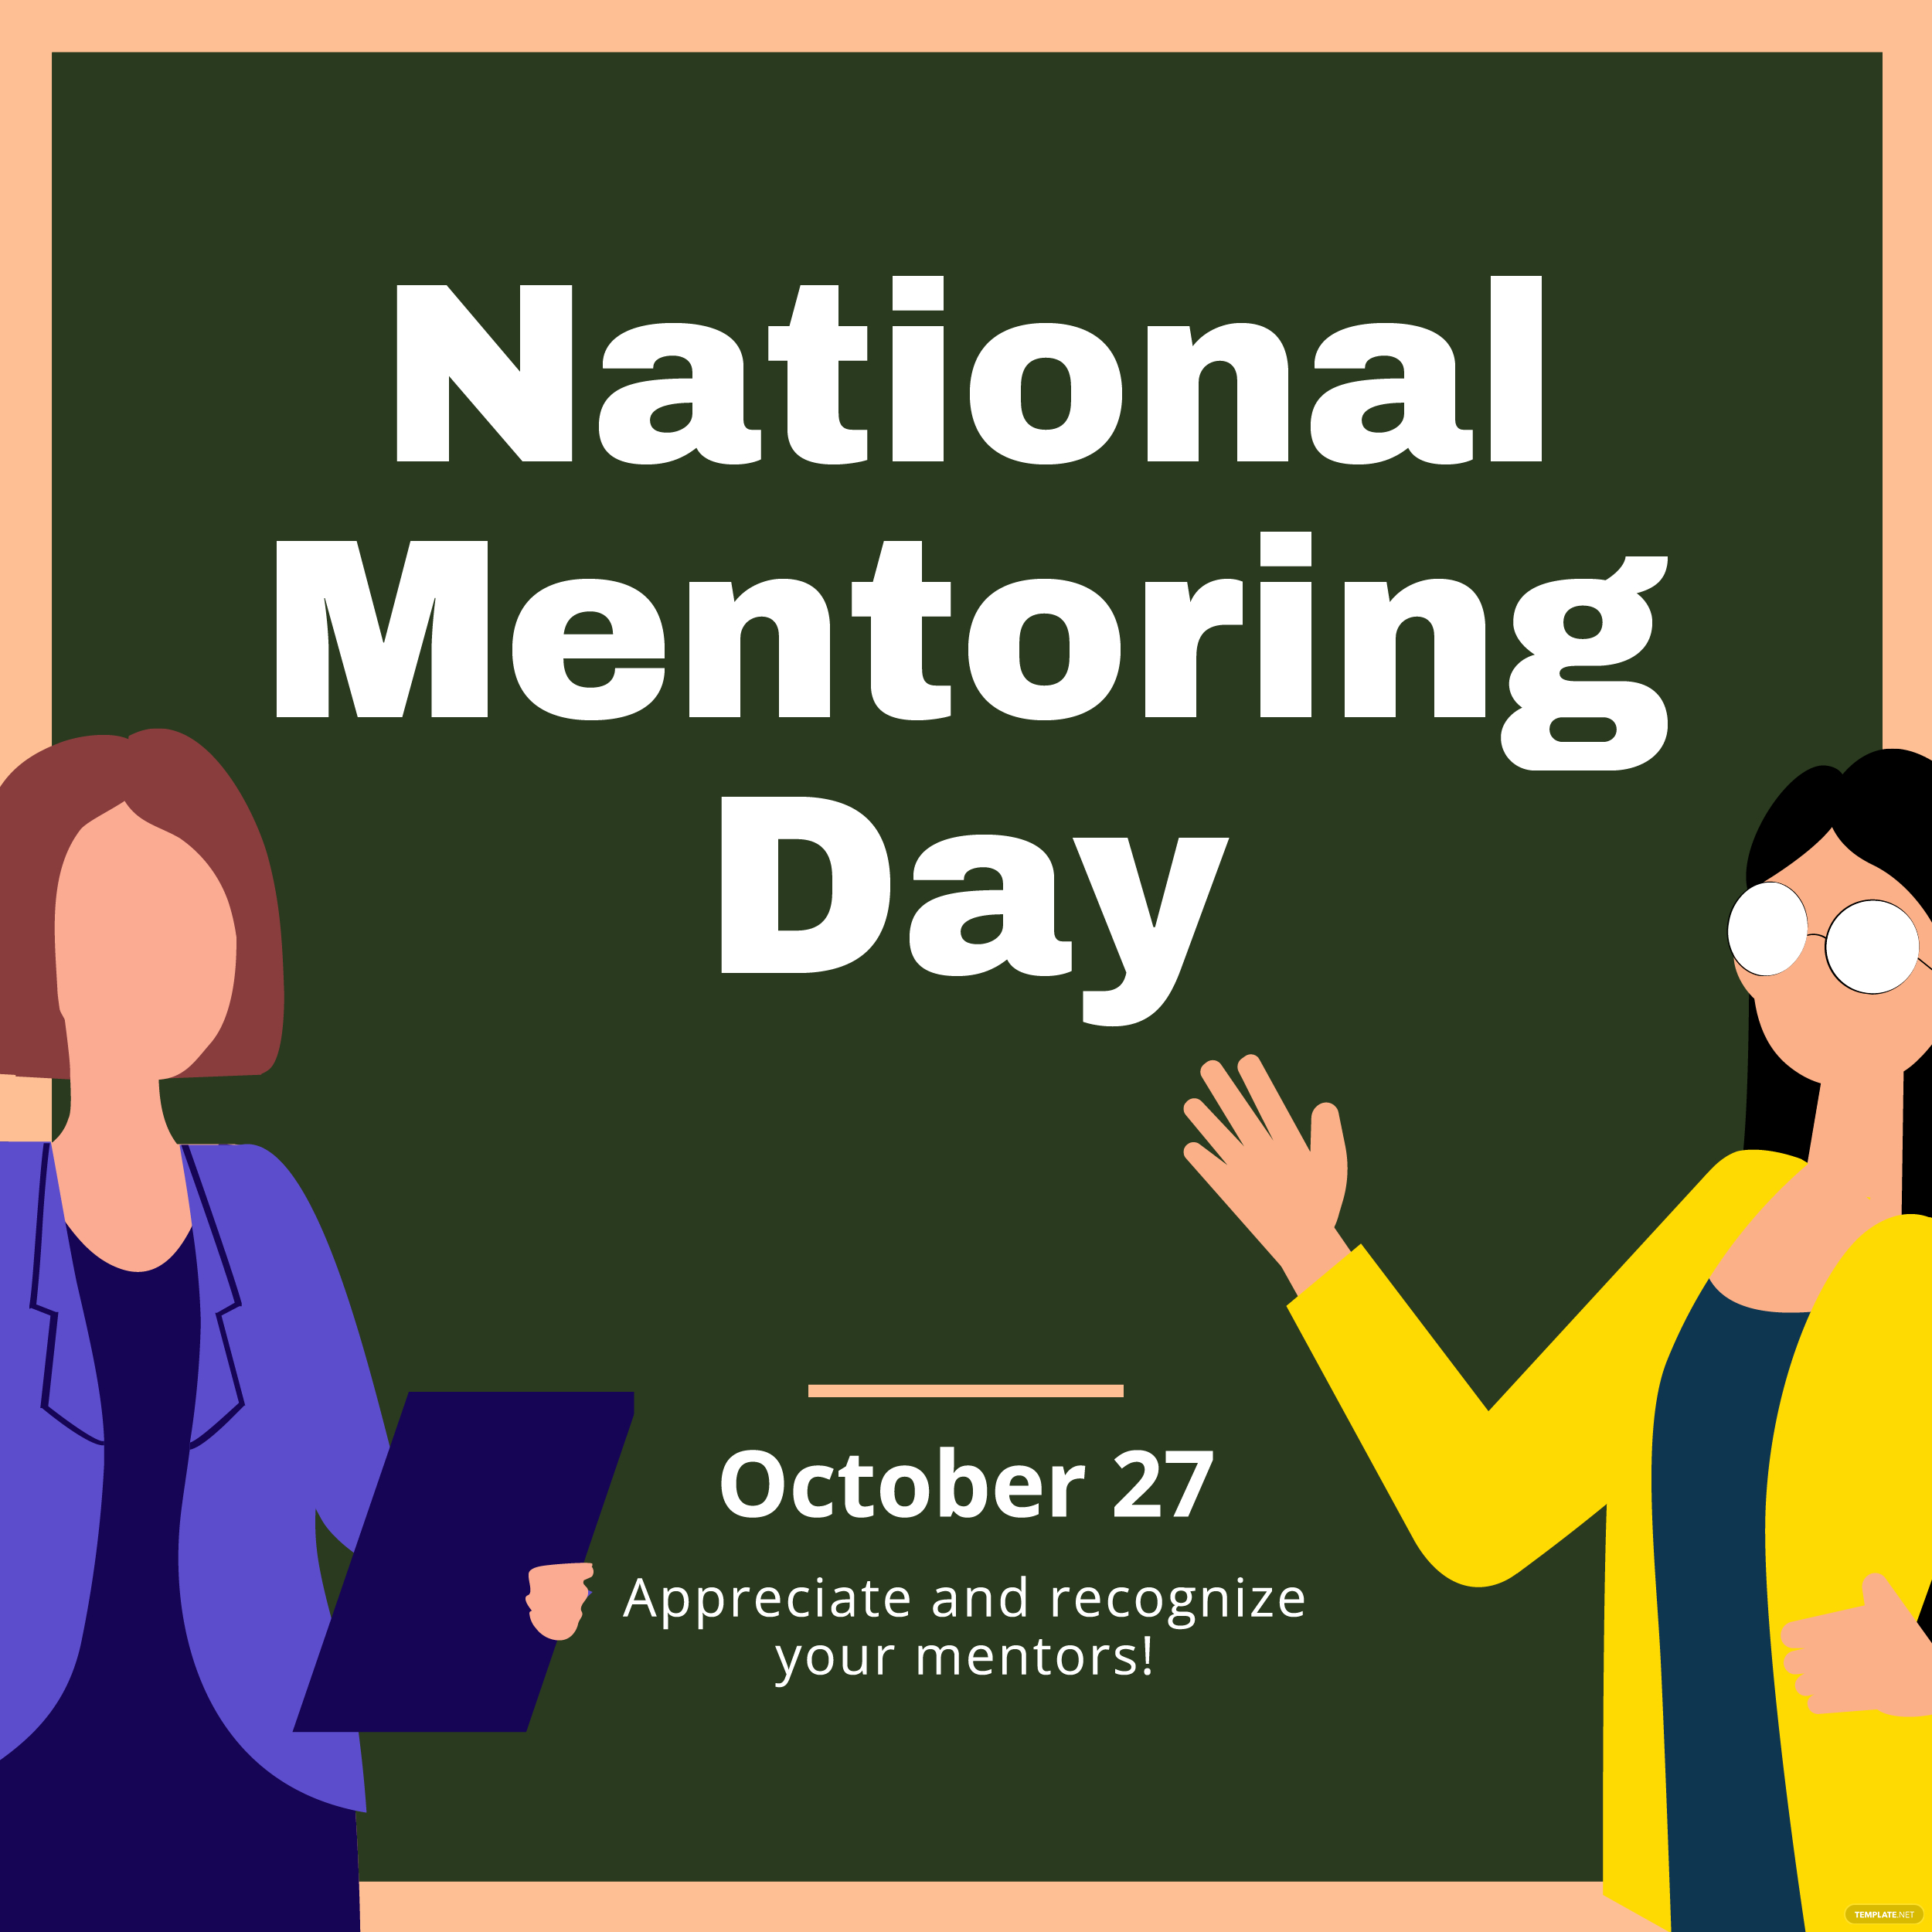 National Mentoring Day When Is National Mentoring Day? Meaning, Dates